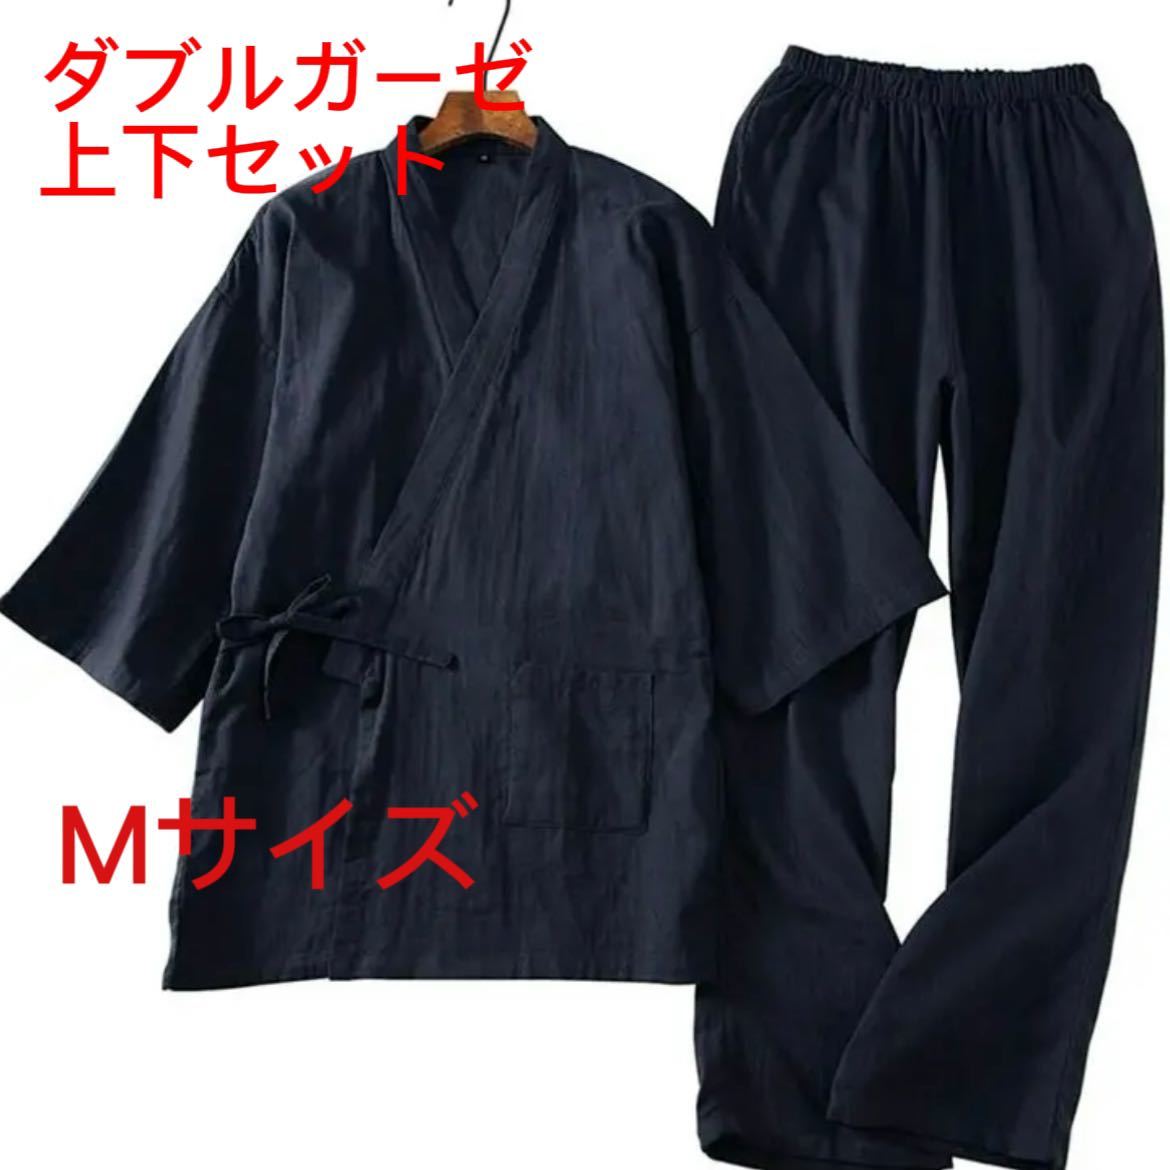  jinbei part shop put on top and bottom set M Samue .... men's unused tag attaching for man 